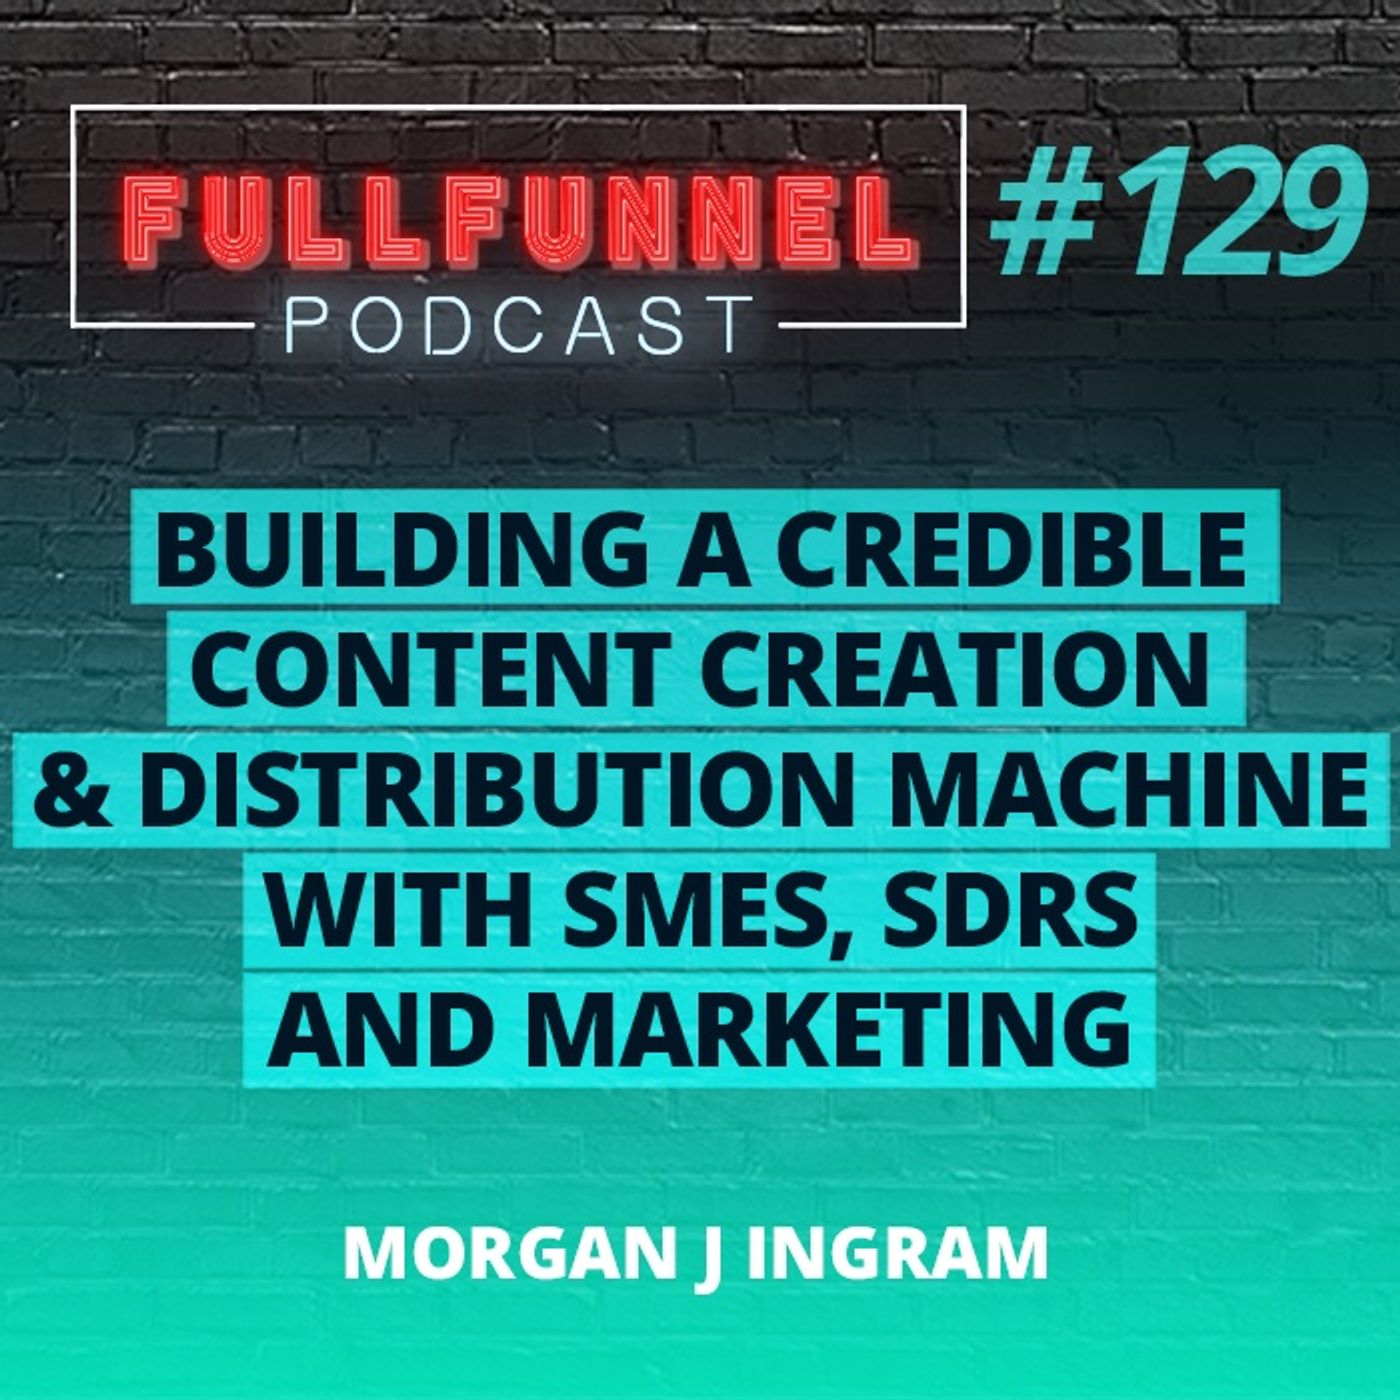 Episode 129: Building a credible content creation and distribution machine with SMEs, SDRs and marketing with Andrei, Vladimir & Morgan